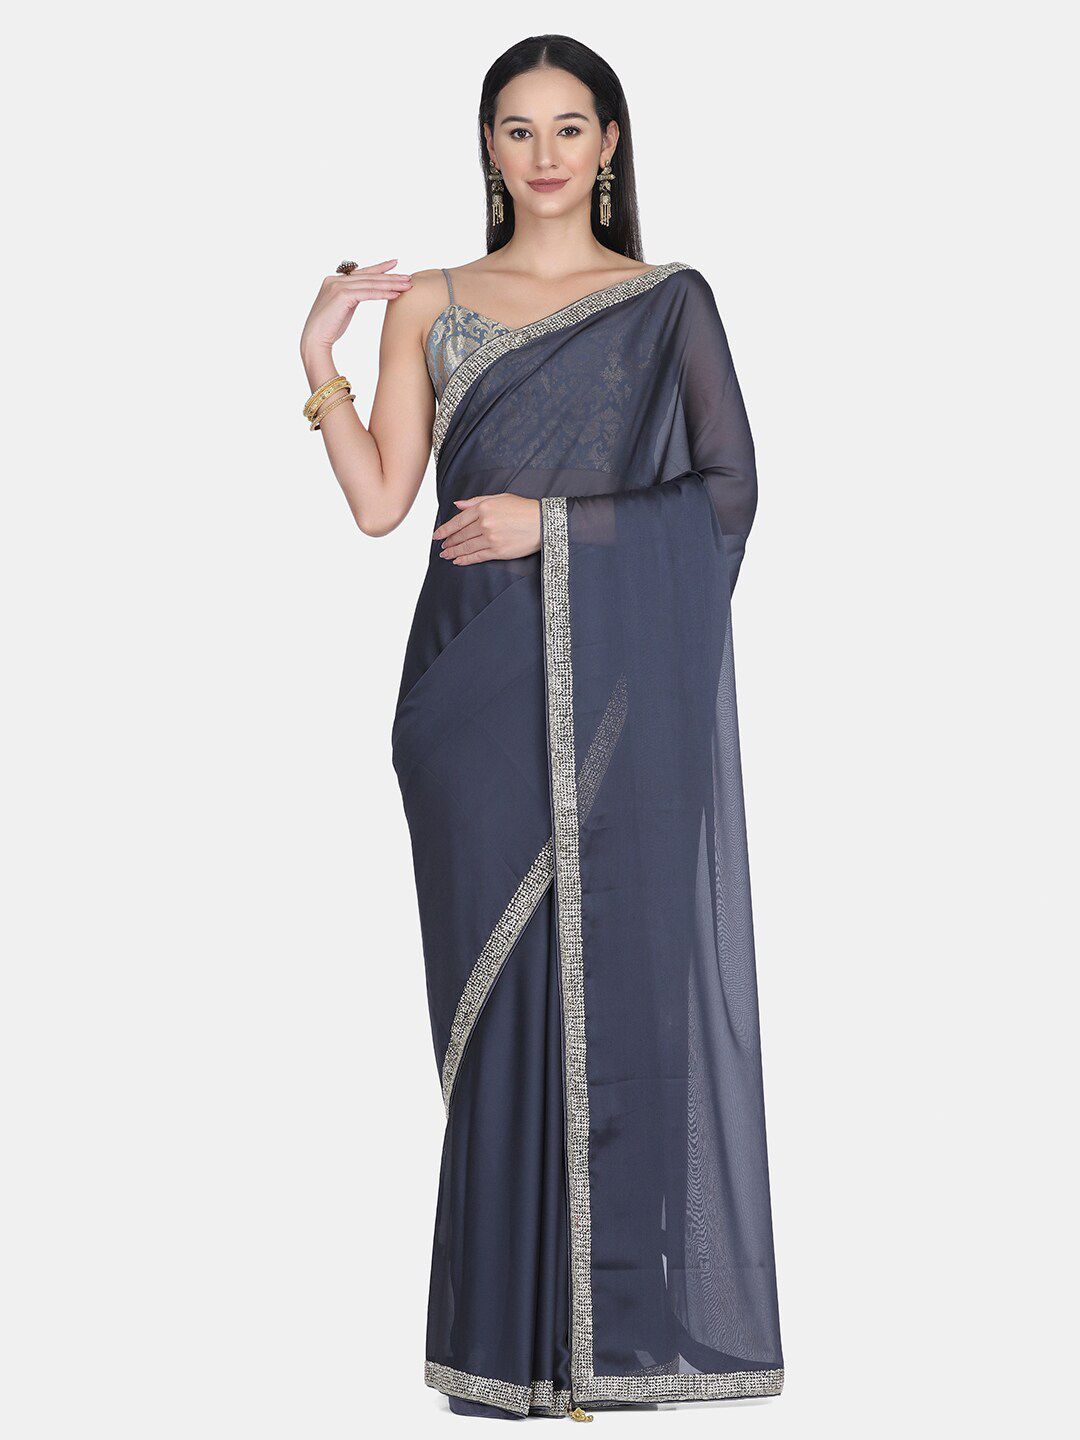 BOMBAY SELECTIONS Grey & White Pure Crepe Saree Price in India